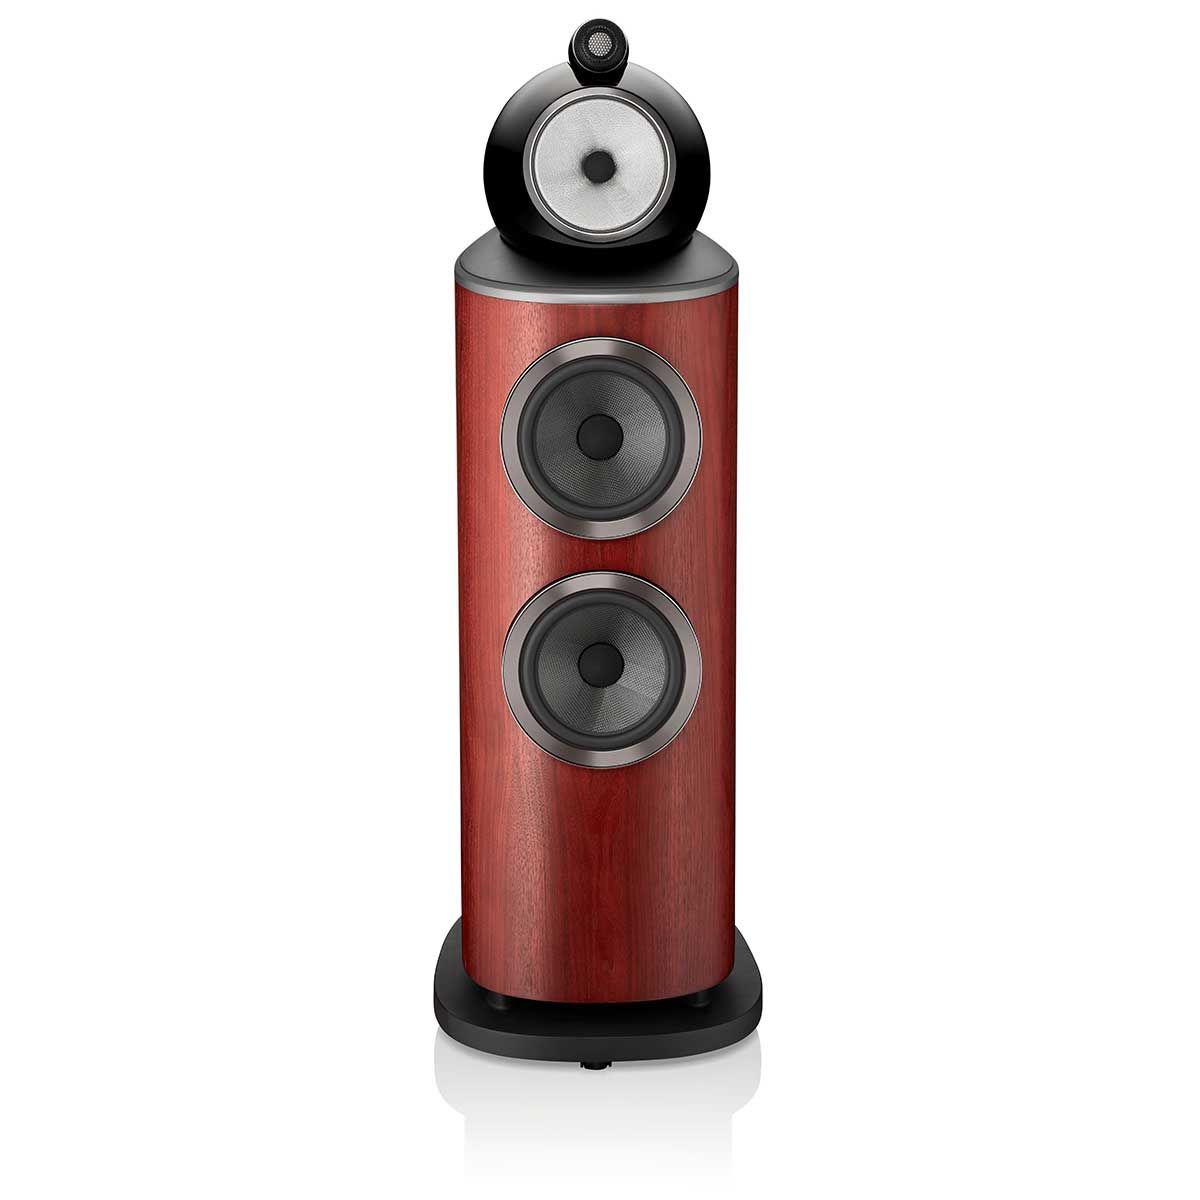 Bowers & Wilkins 802 D4 Floorstanding Speaker, Satin Rosenut, front view without grille